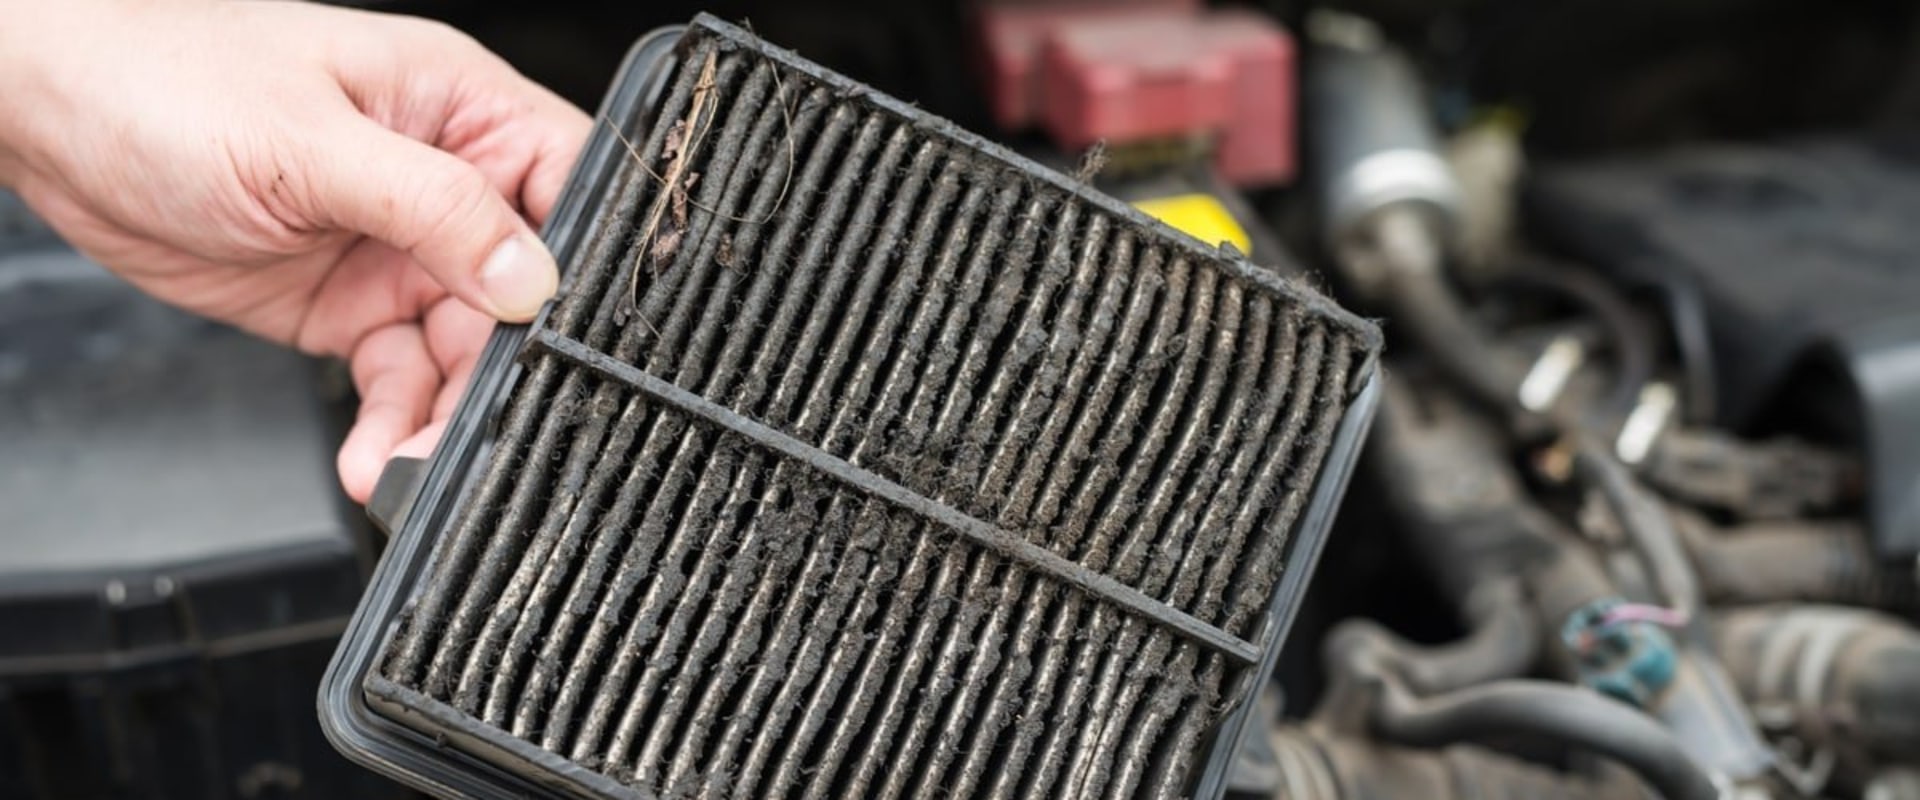 What Can Dirty Air Filters Cause? - The Impact of Poor Indoor Air Quality